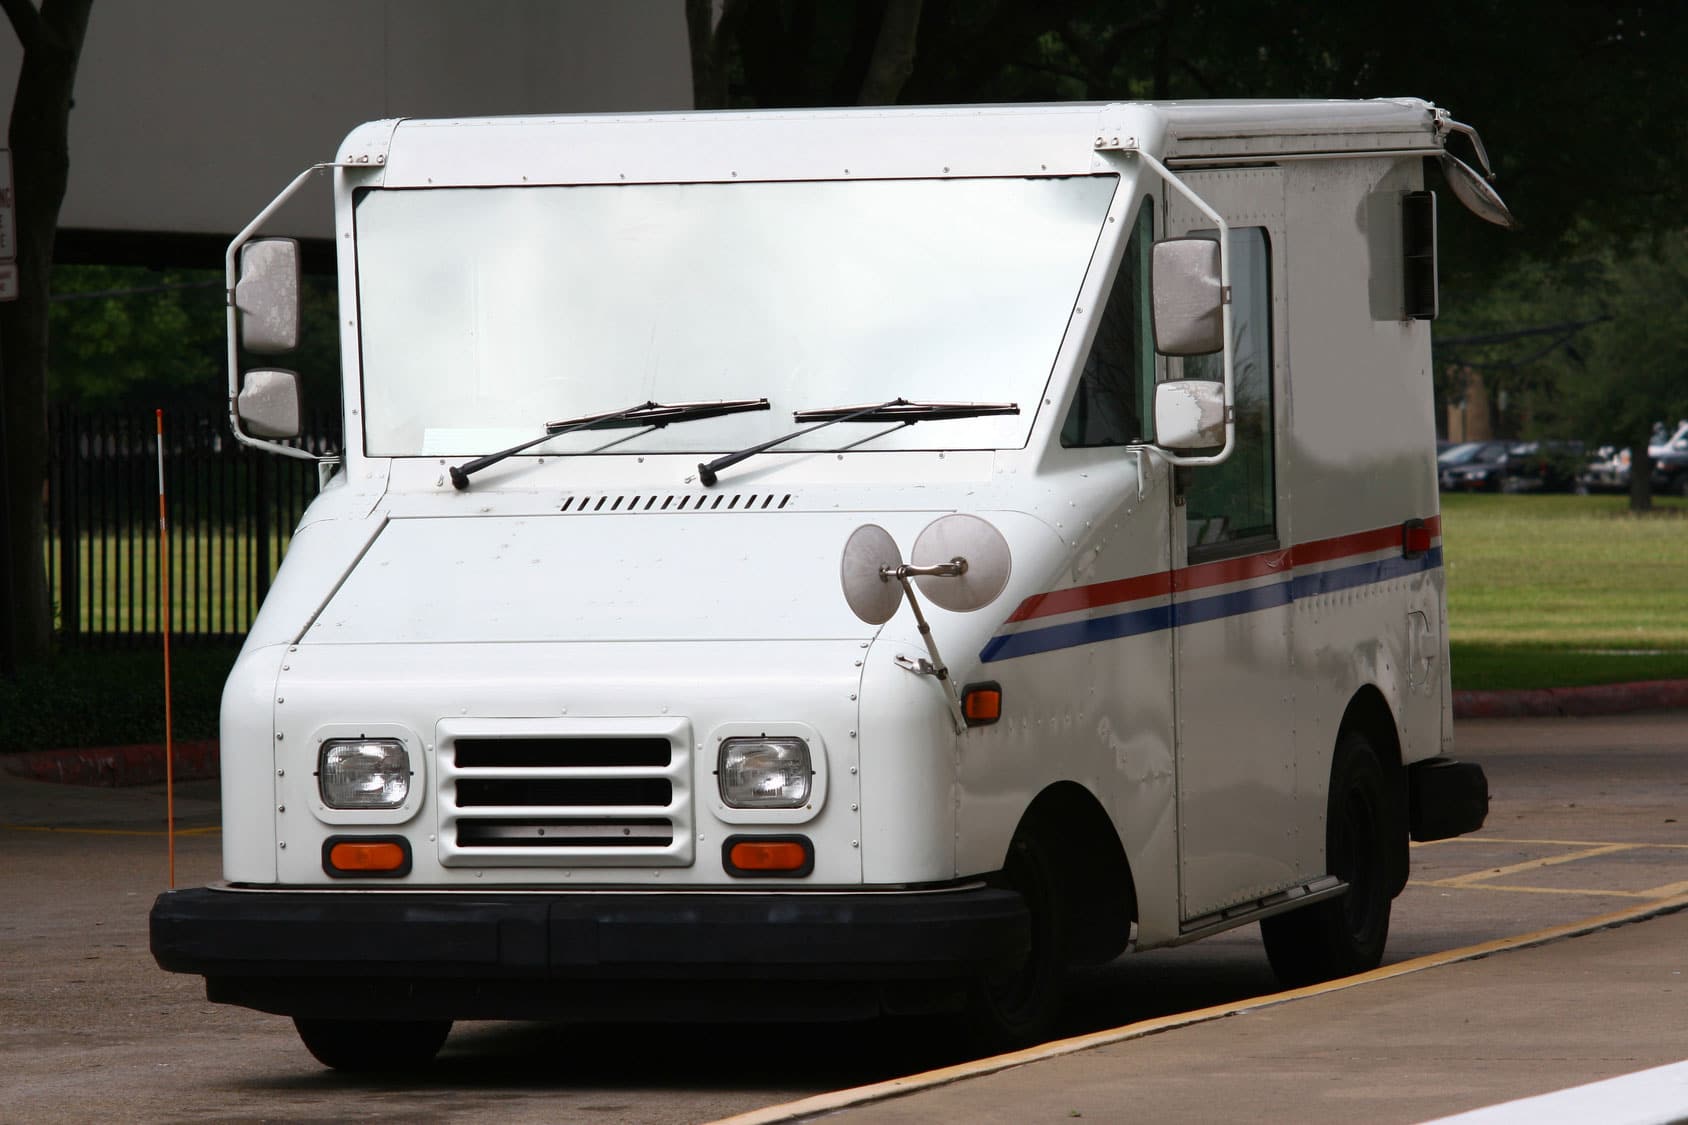 Amazon in Partnership with the US Postal Service